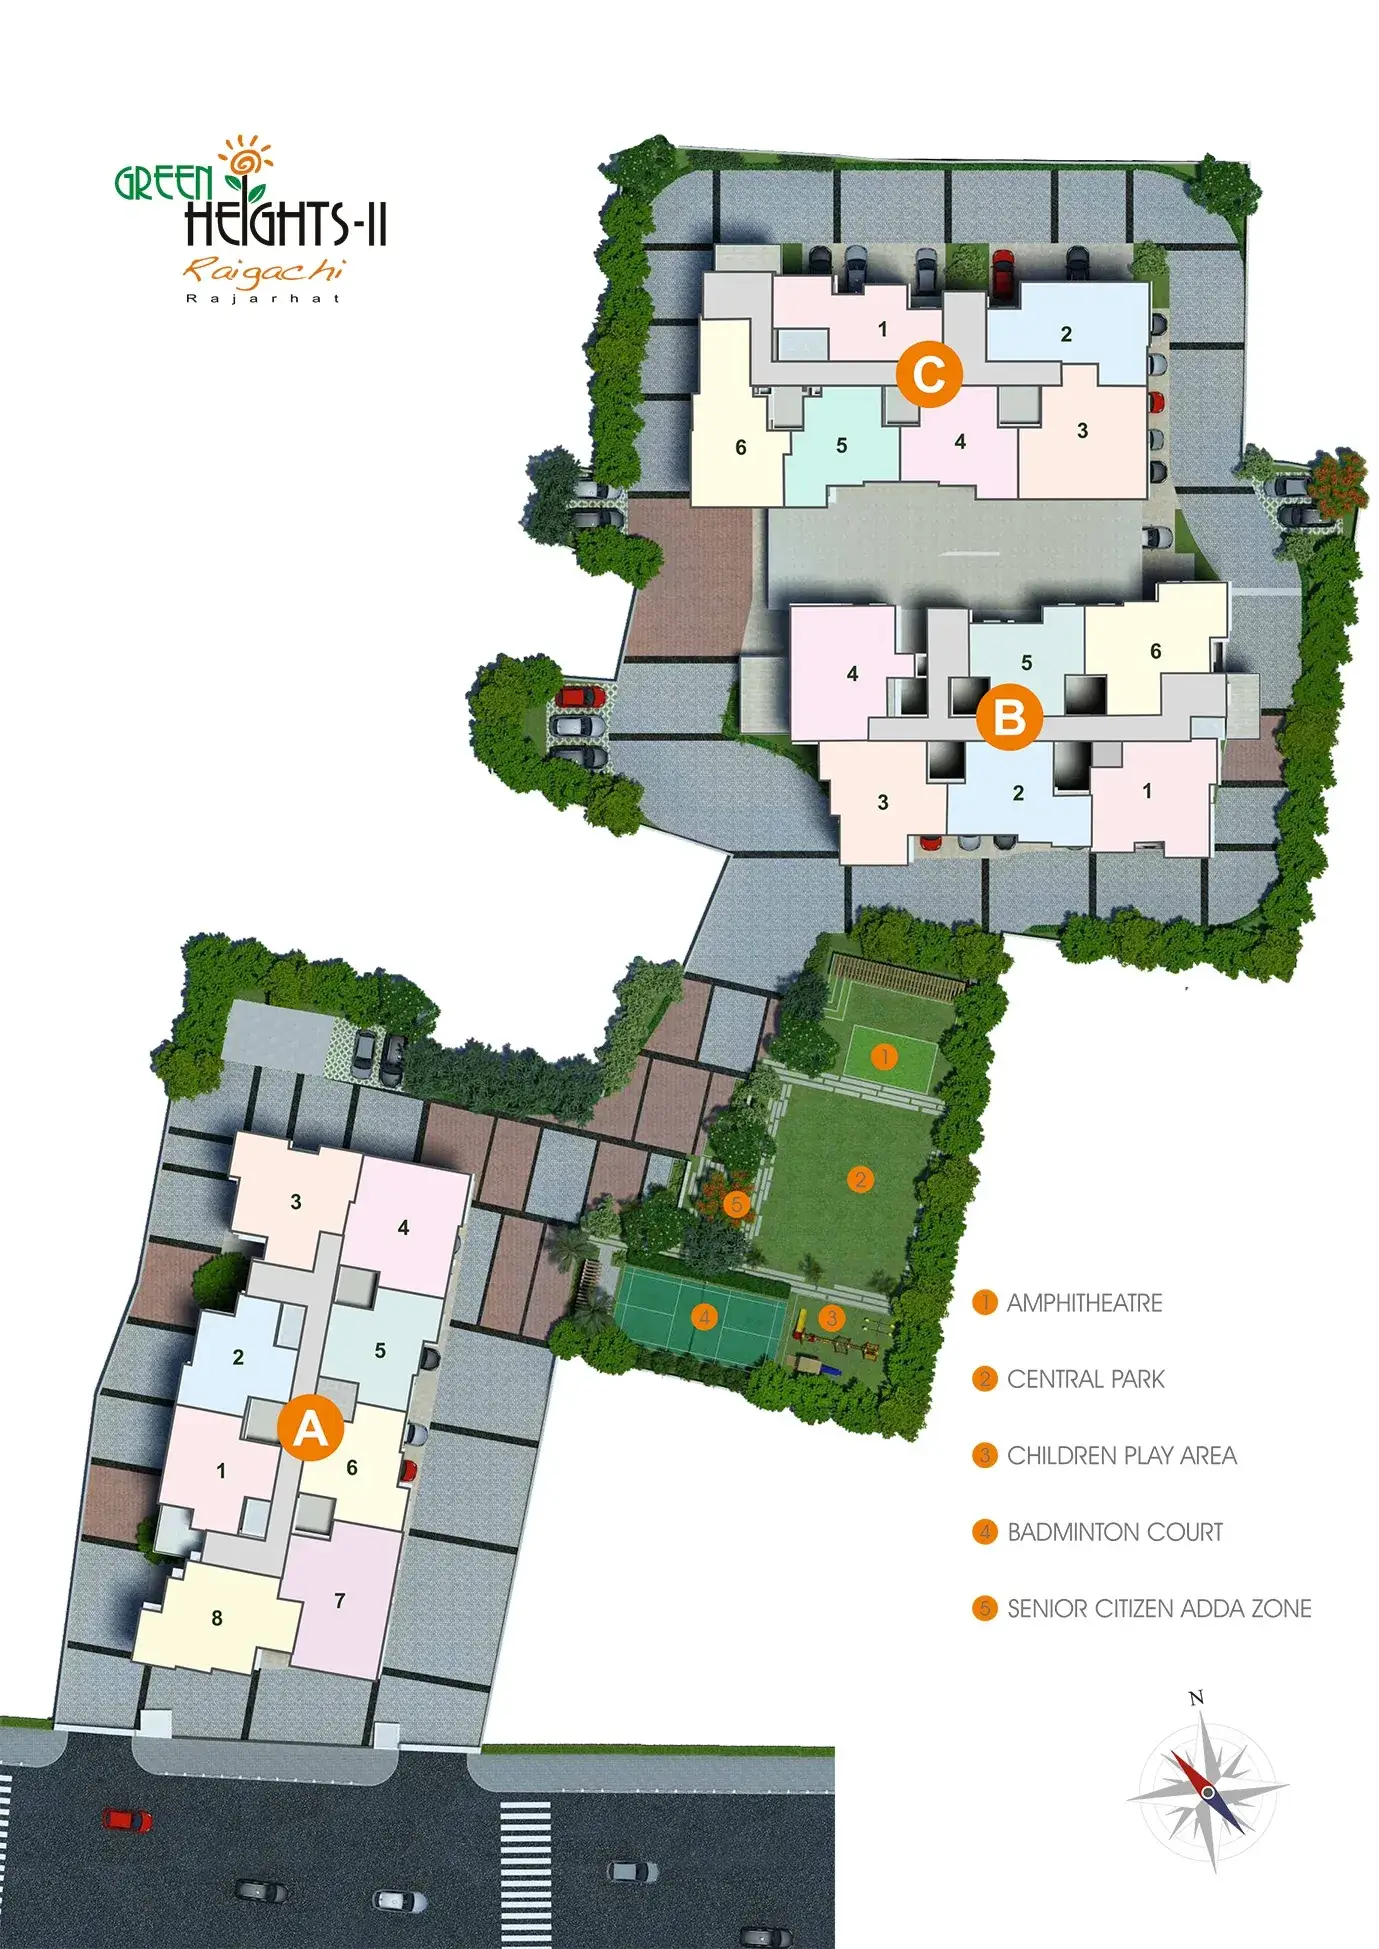 Green Heights Master Layout Plan